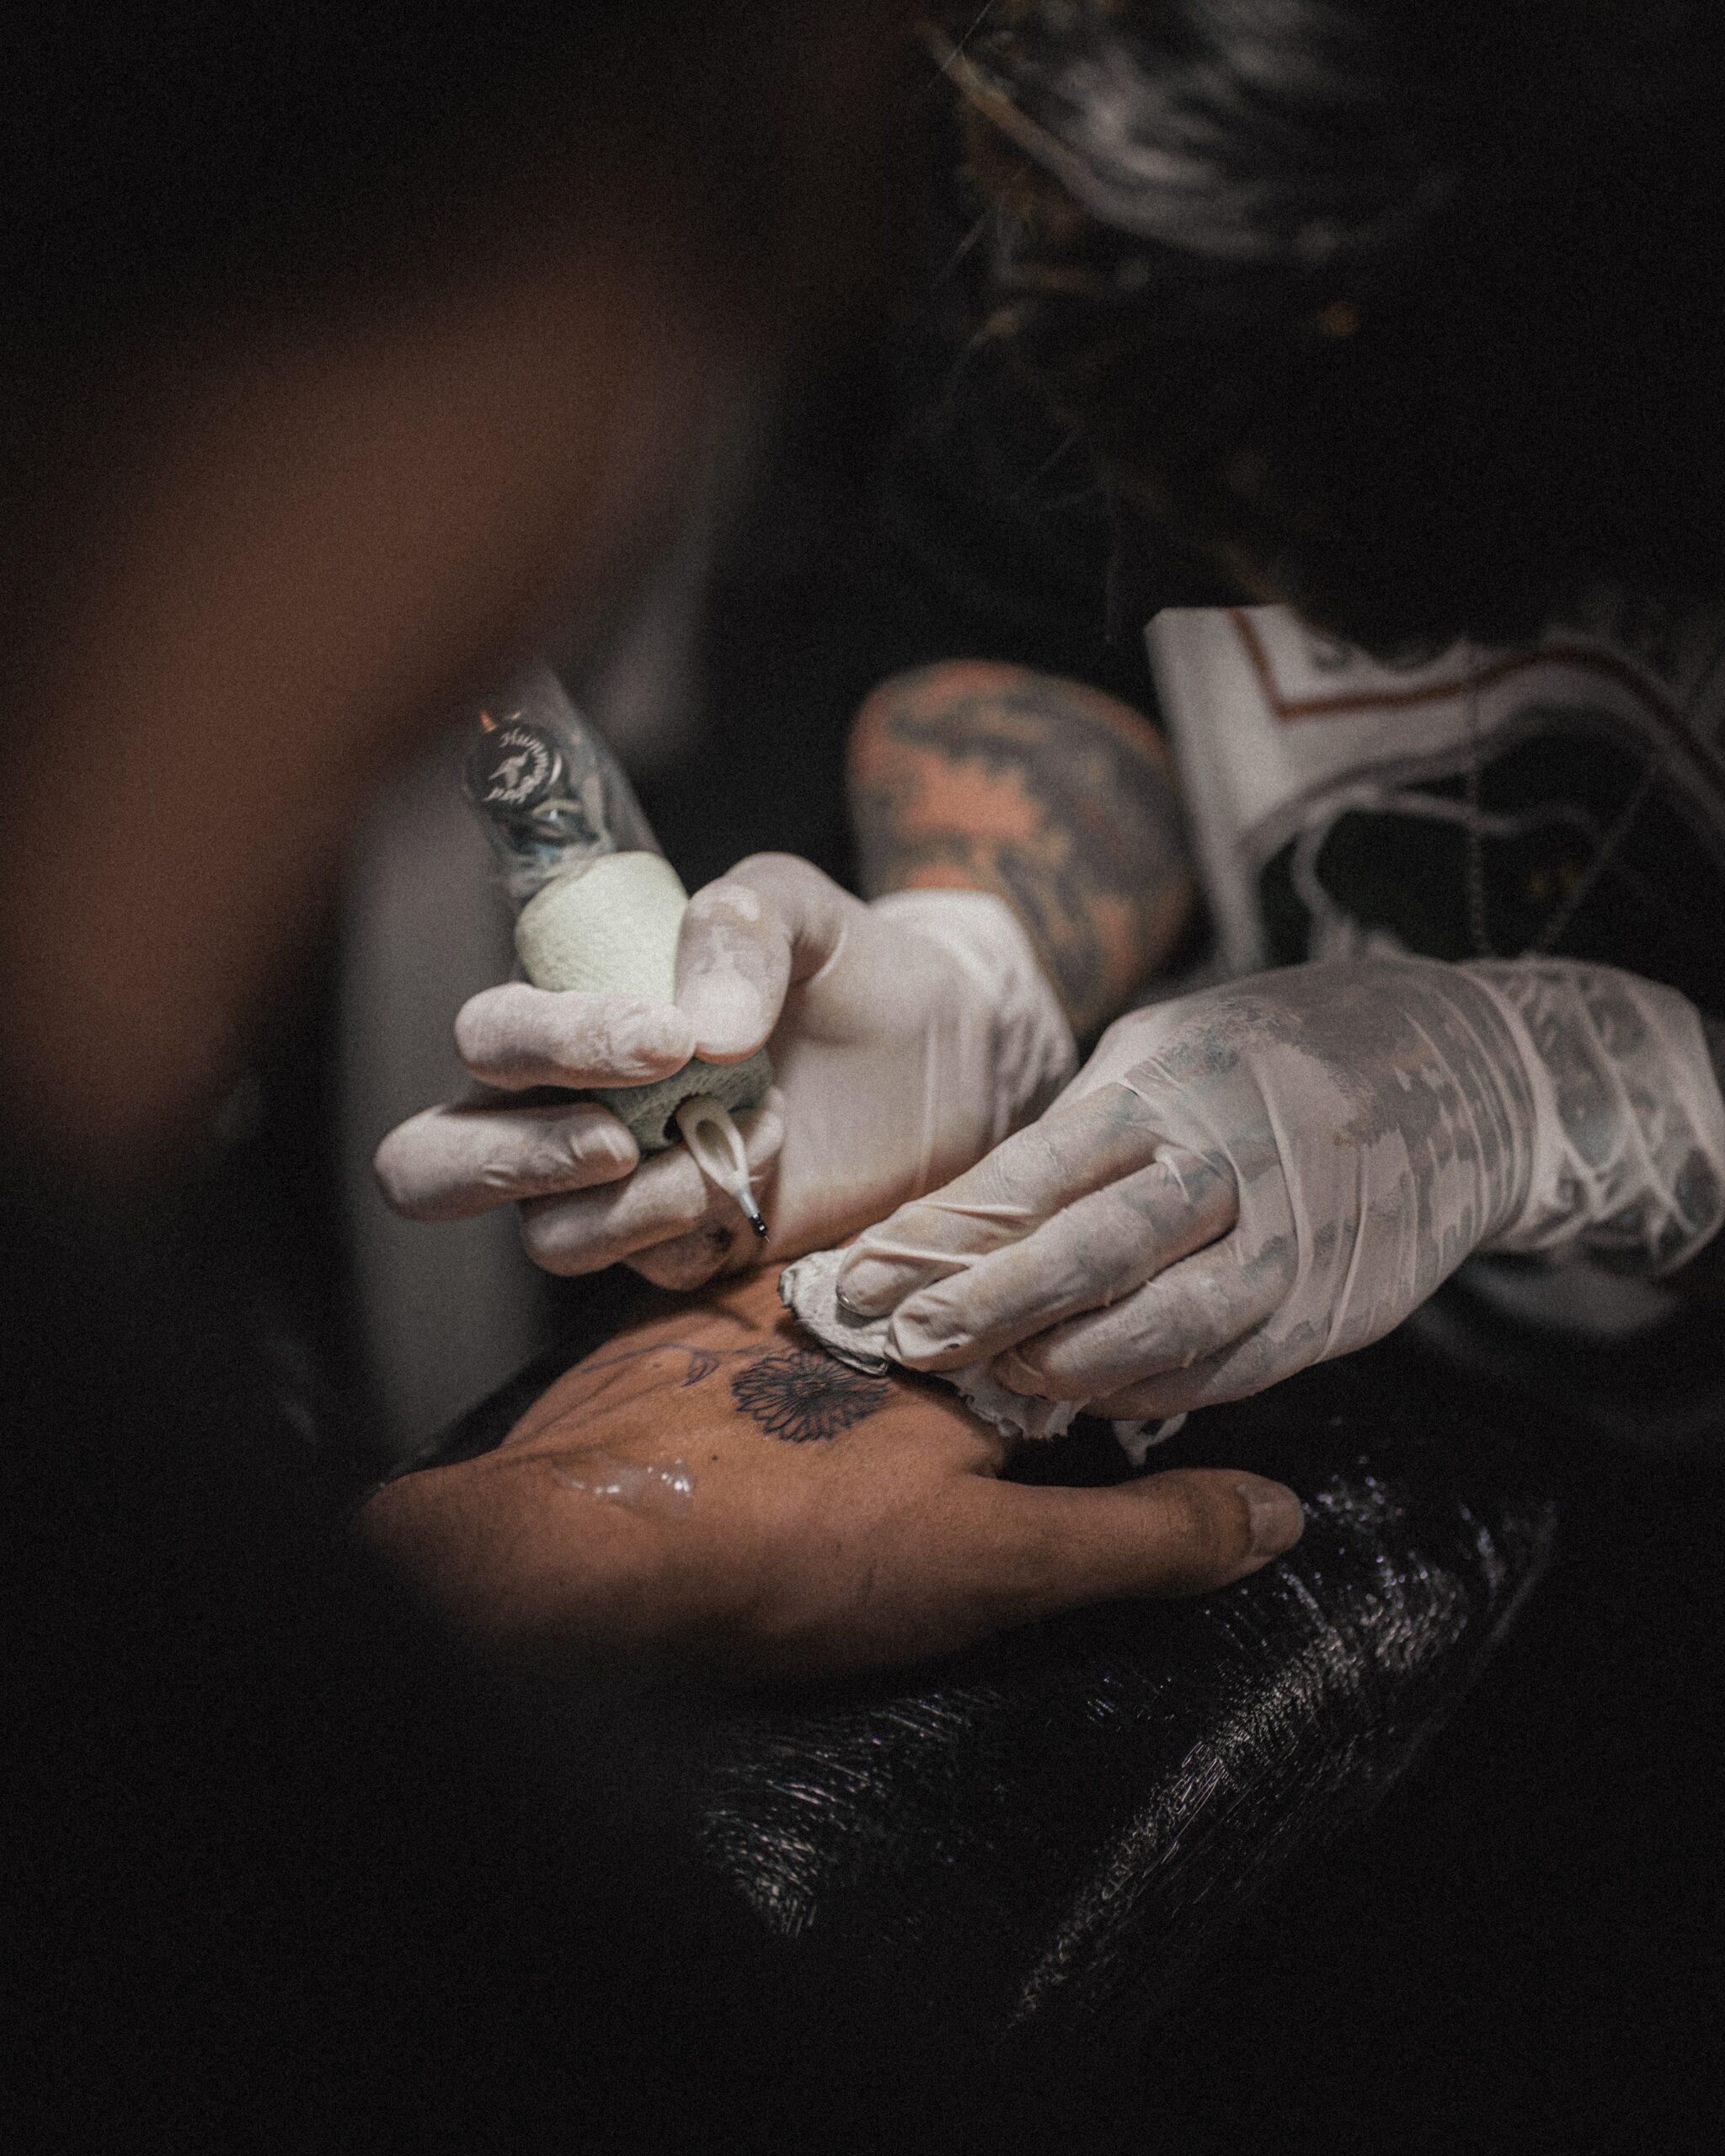 After Care – The Black Rose Tattoo Parlour